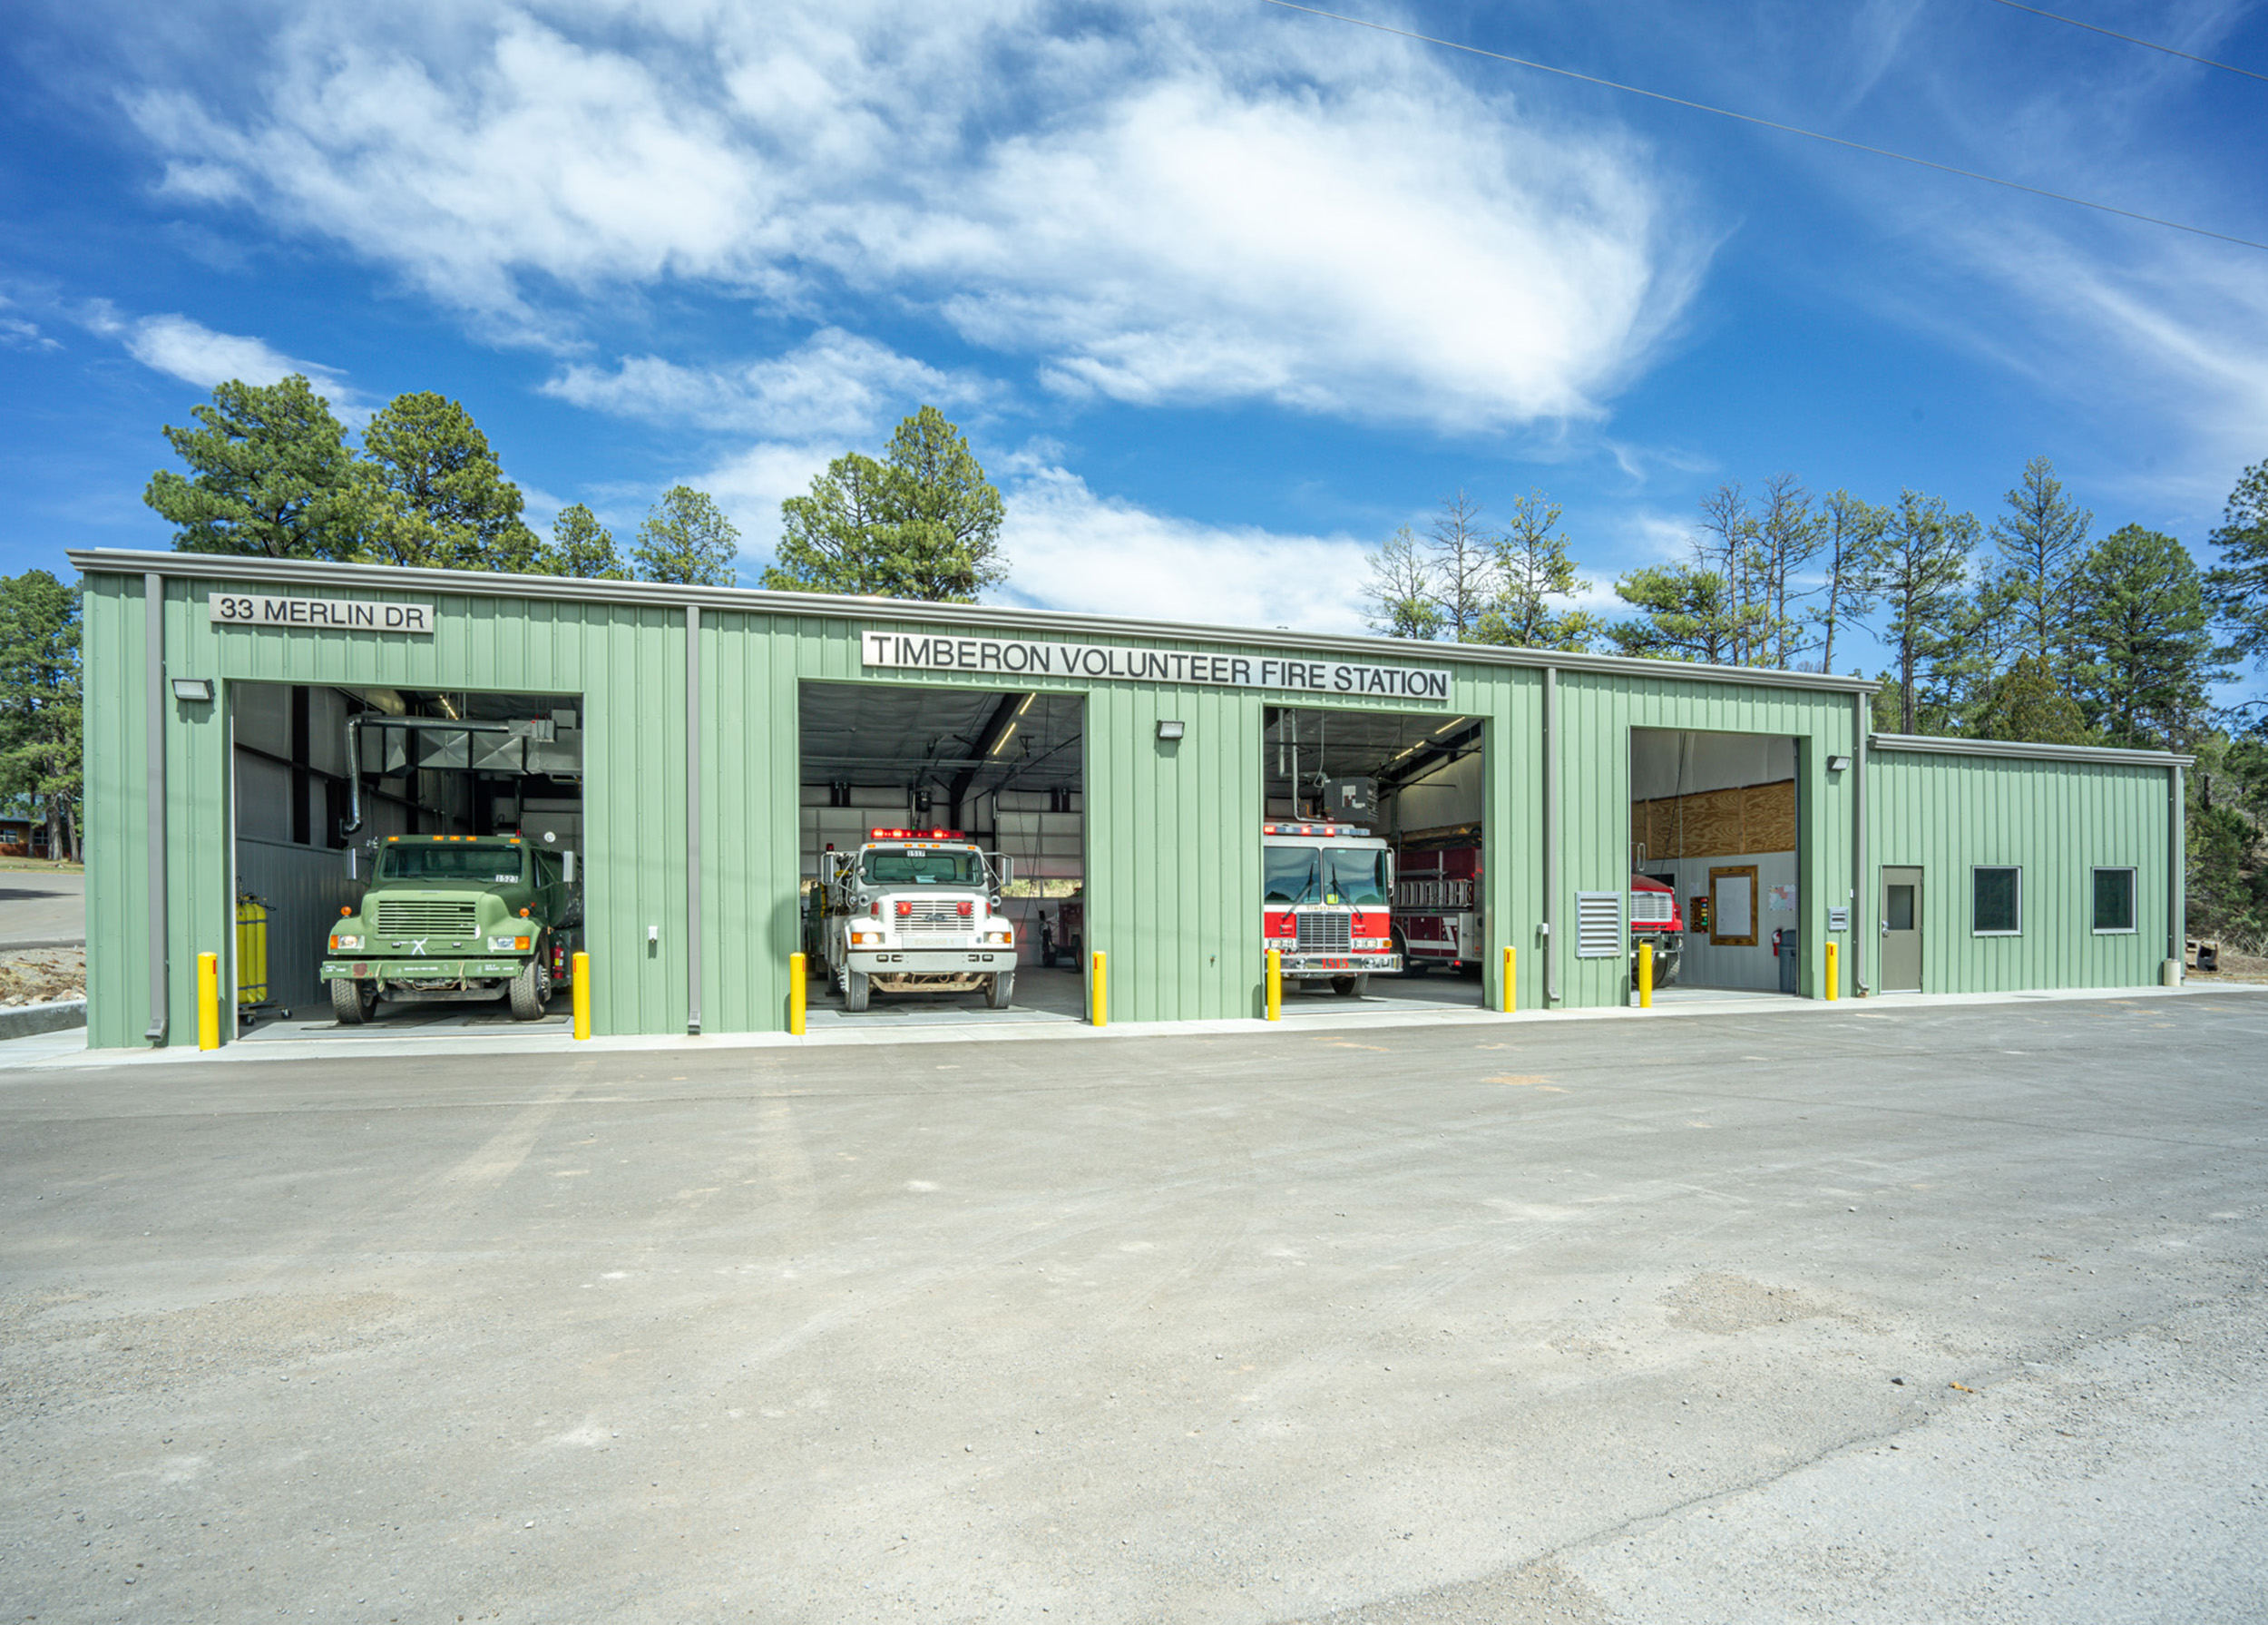 Wilson & Company designed the 6,360-sq.-ft. building to include four apparatus bays, two offices, a break area, and the required support facilities. 